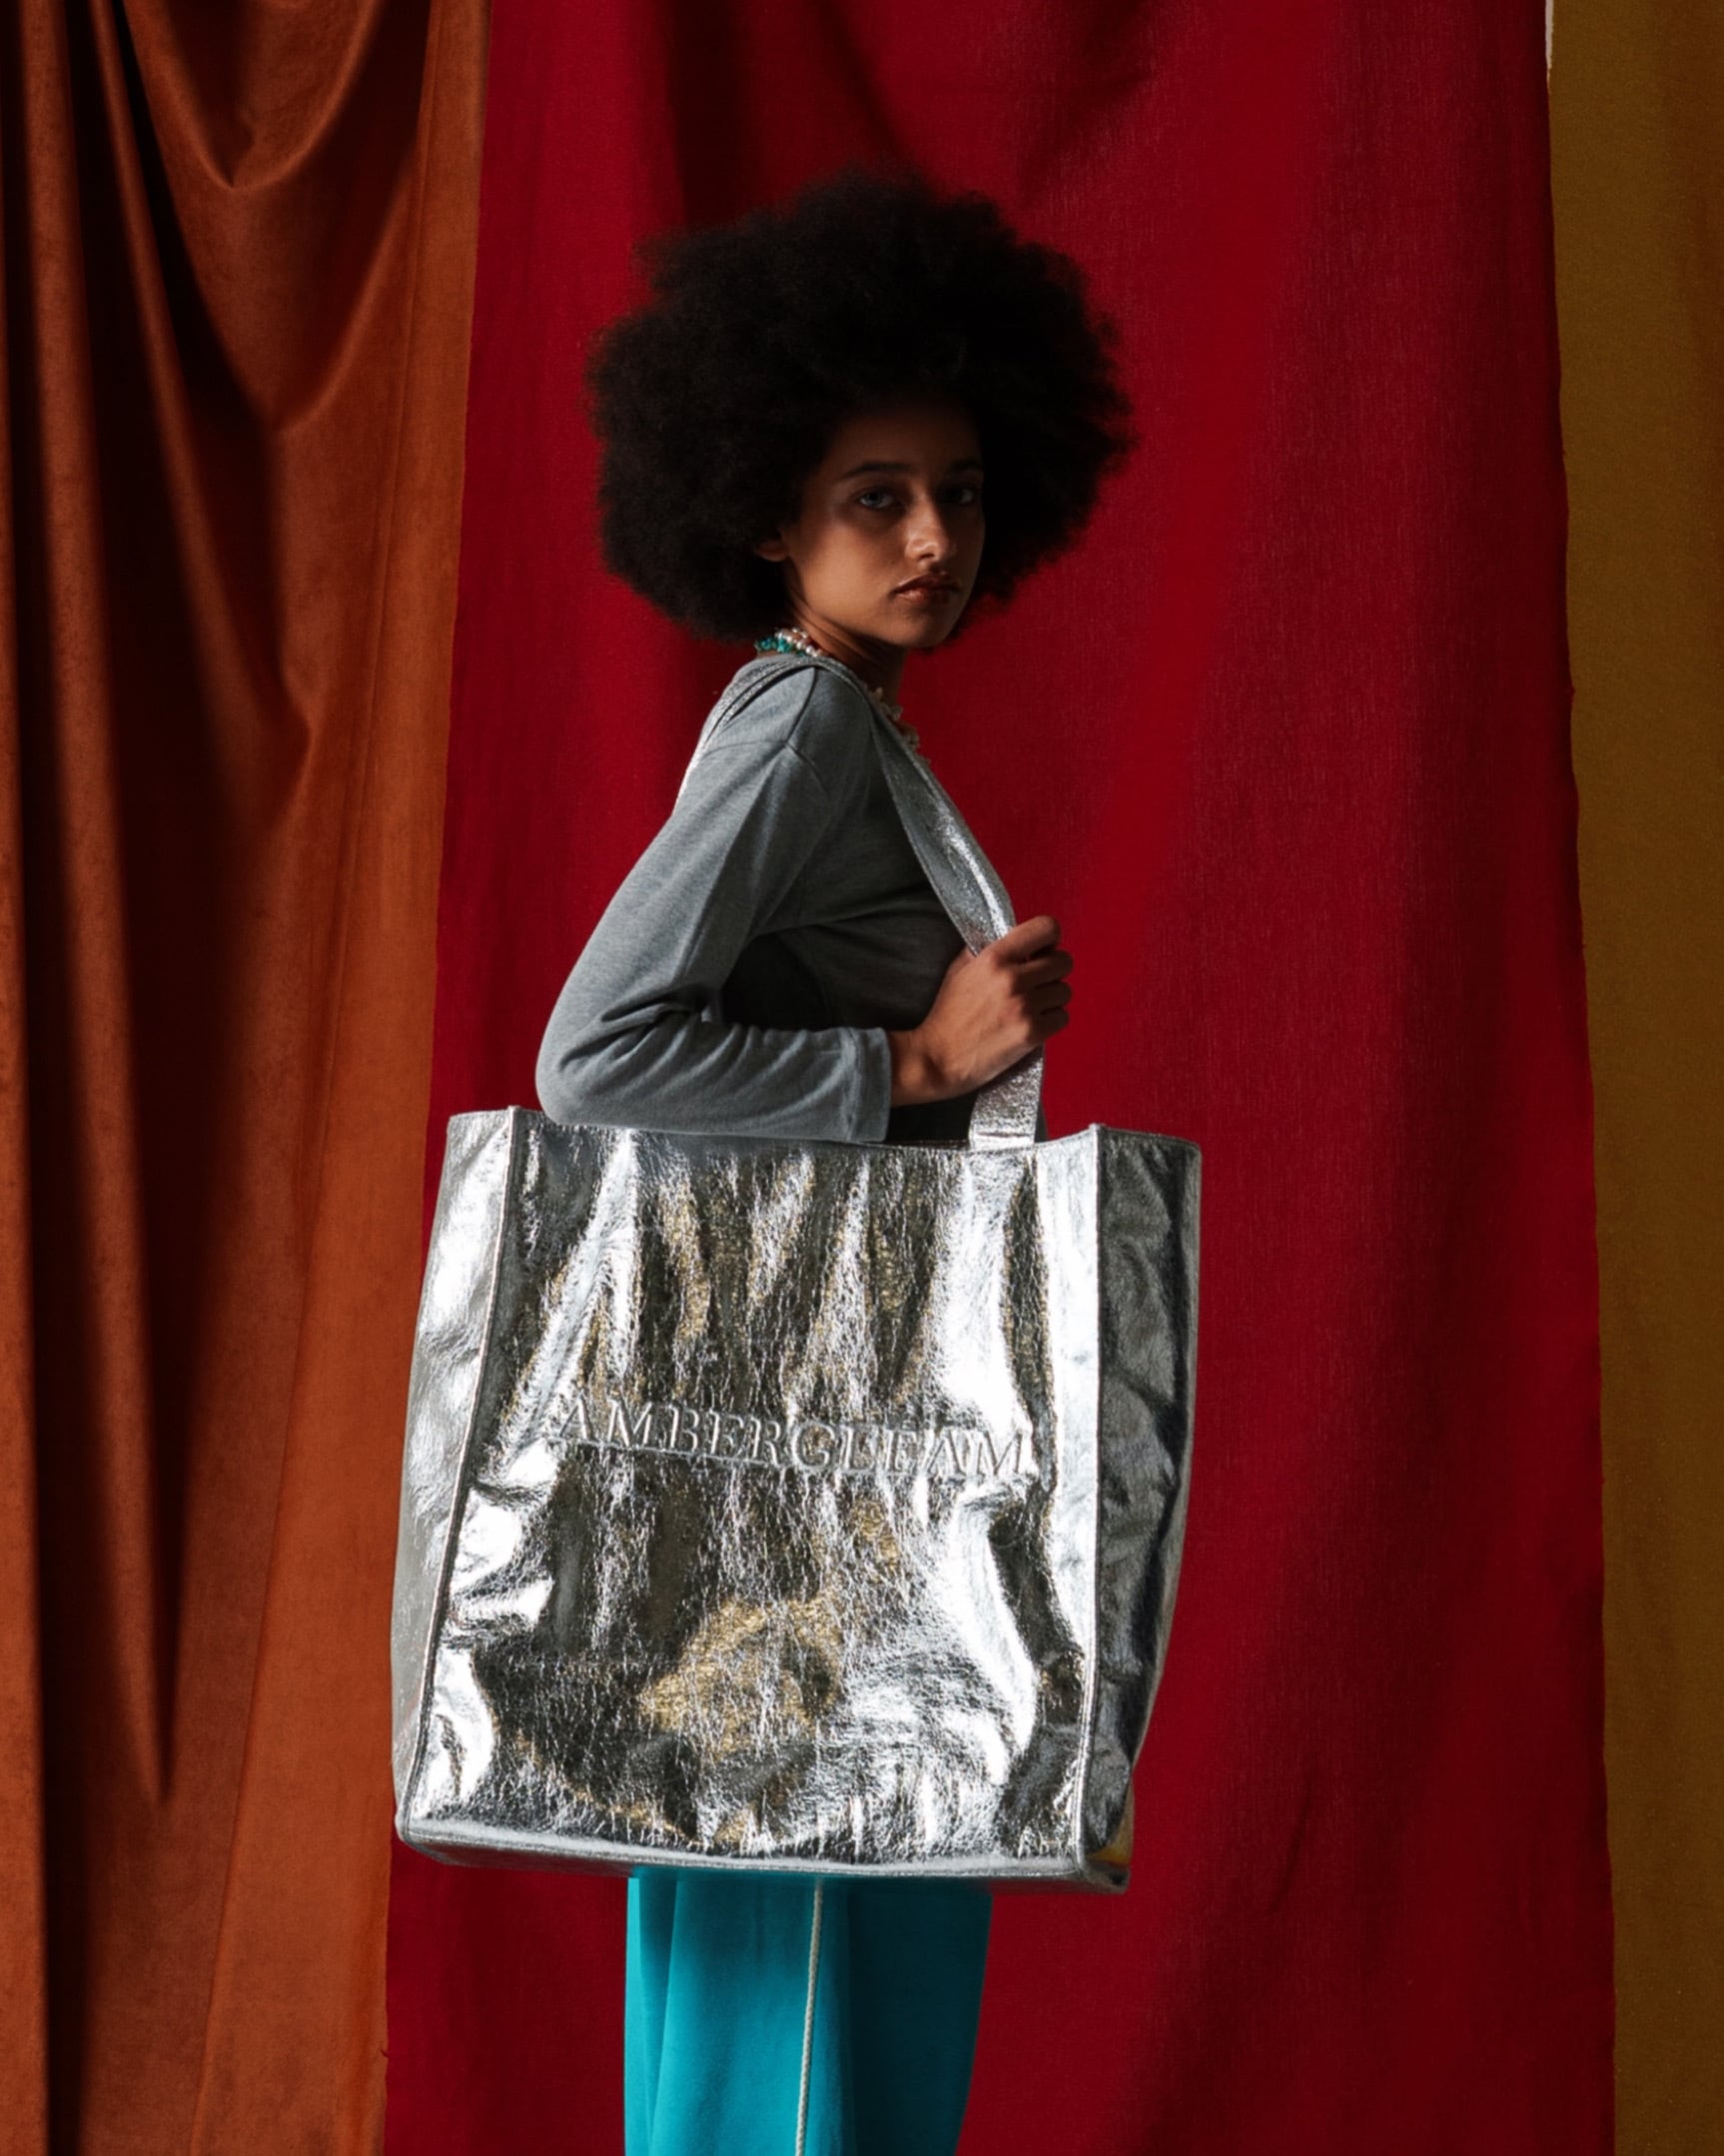 Name:BIG Leather Tote Bag | Color:Silver【AMBERGLEAM_アンバーグリーム】| No:113311116